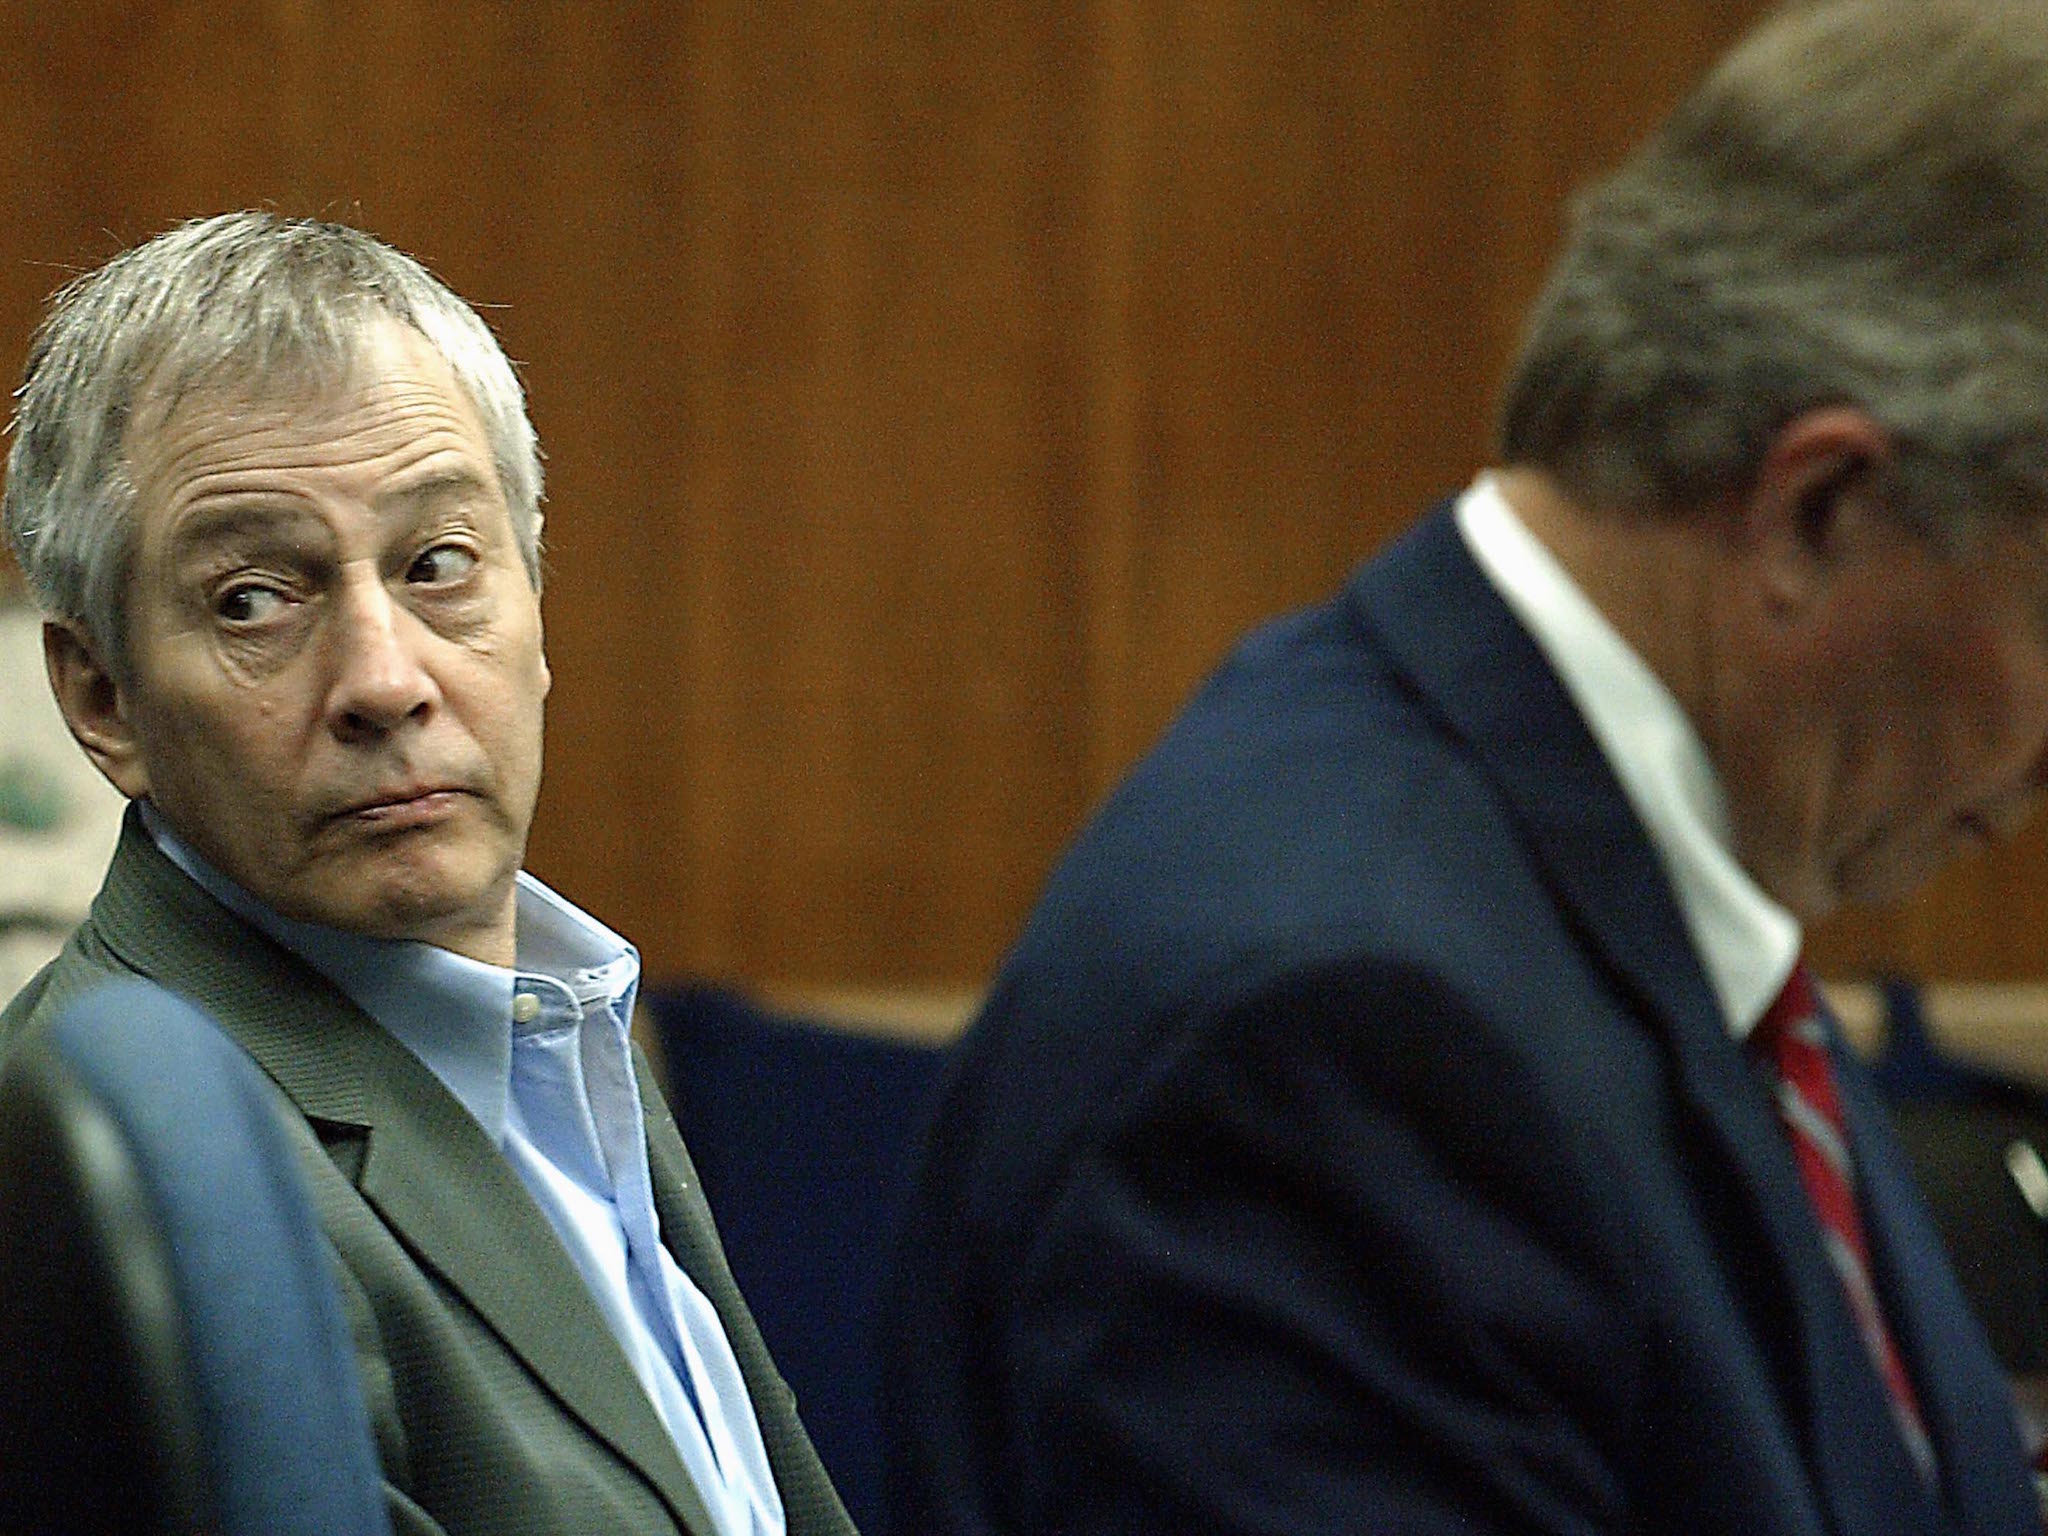 Robert Durst, focus of HBO's series "The Jinx", has pleaded guilty to gun charges in New Orleans federal court.